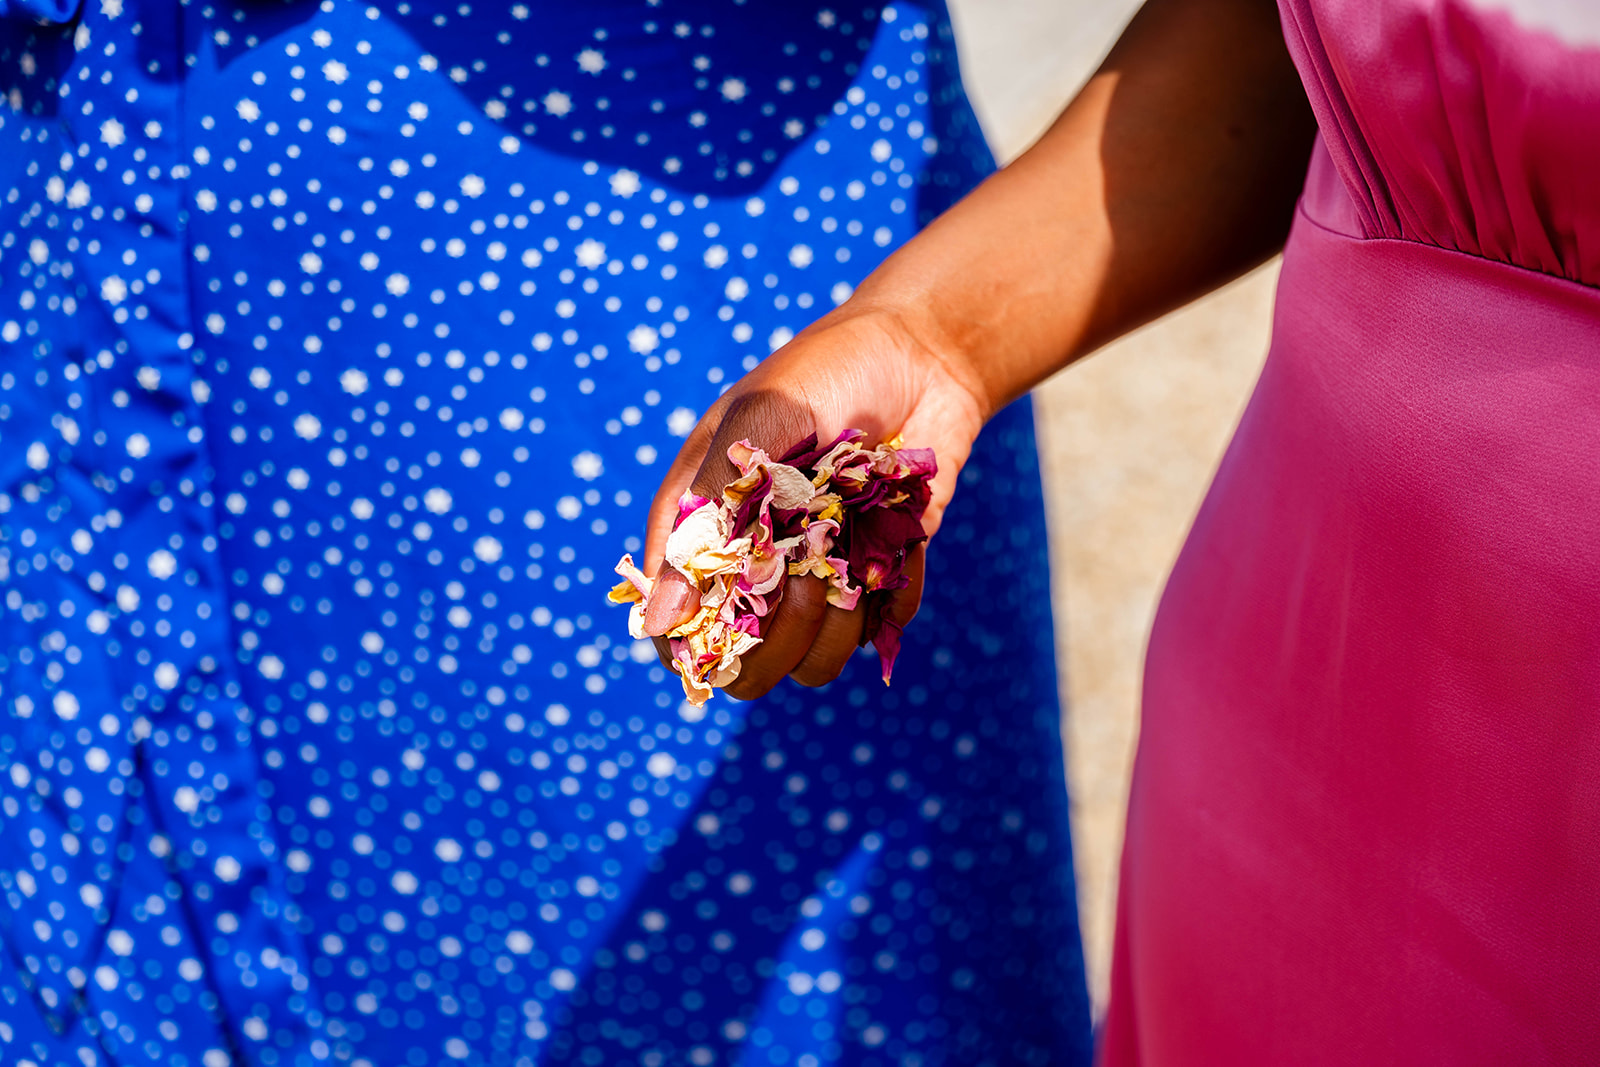 hands clutching petals for the confetti throw in South West France